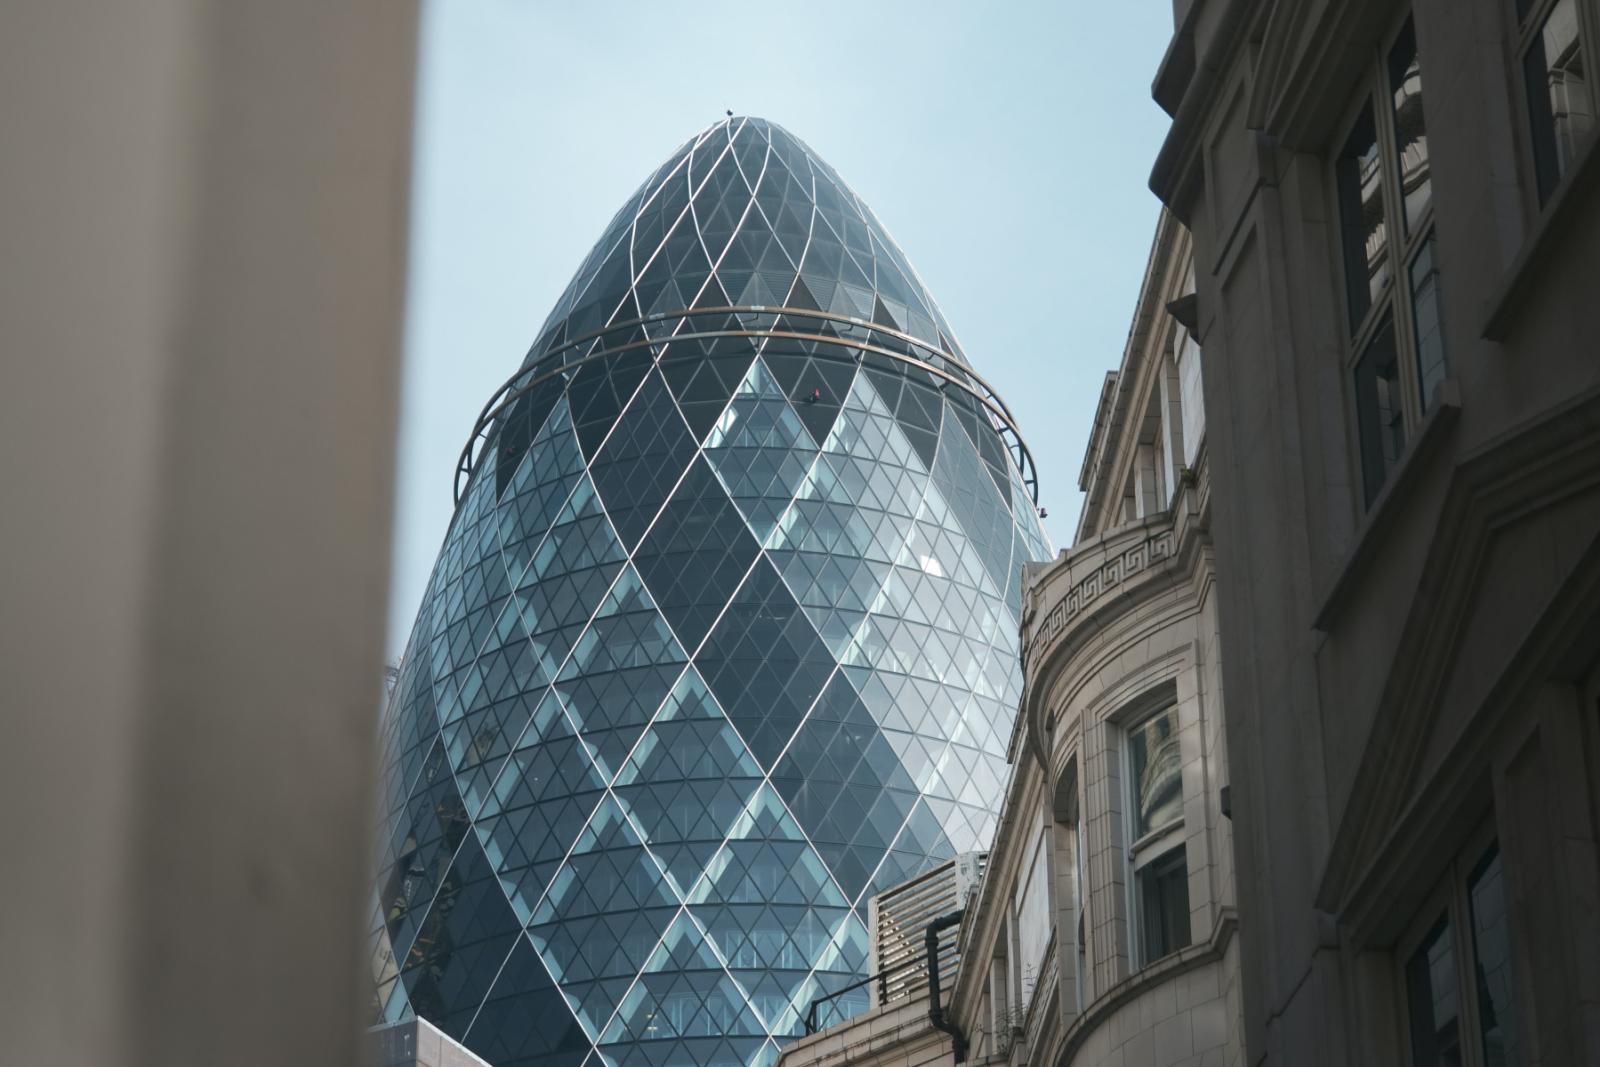 A view from the street level looking up at The Gherkin in London's primary financial district.